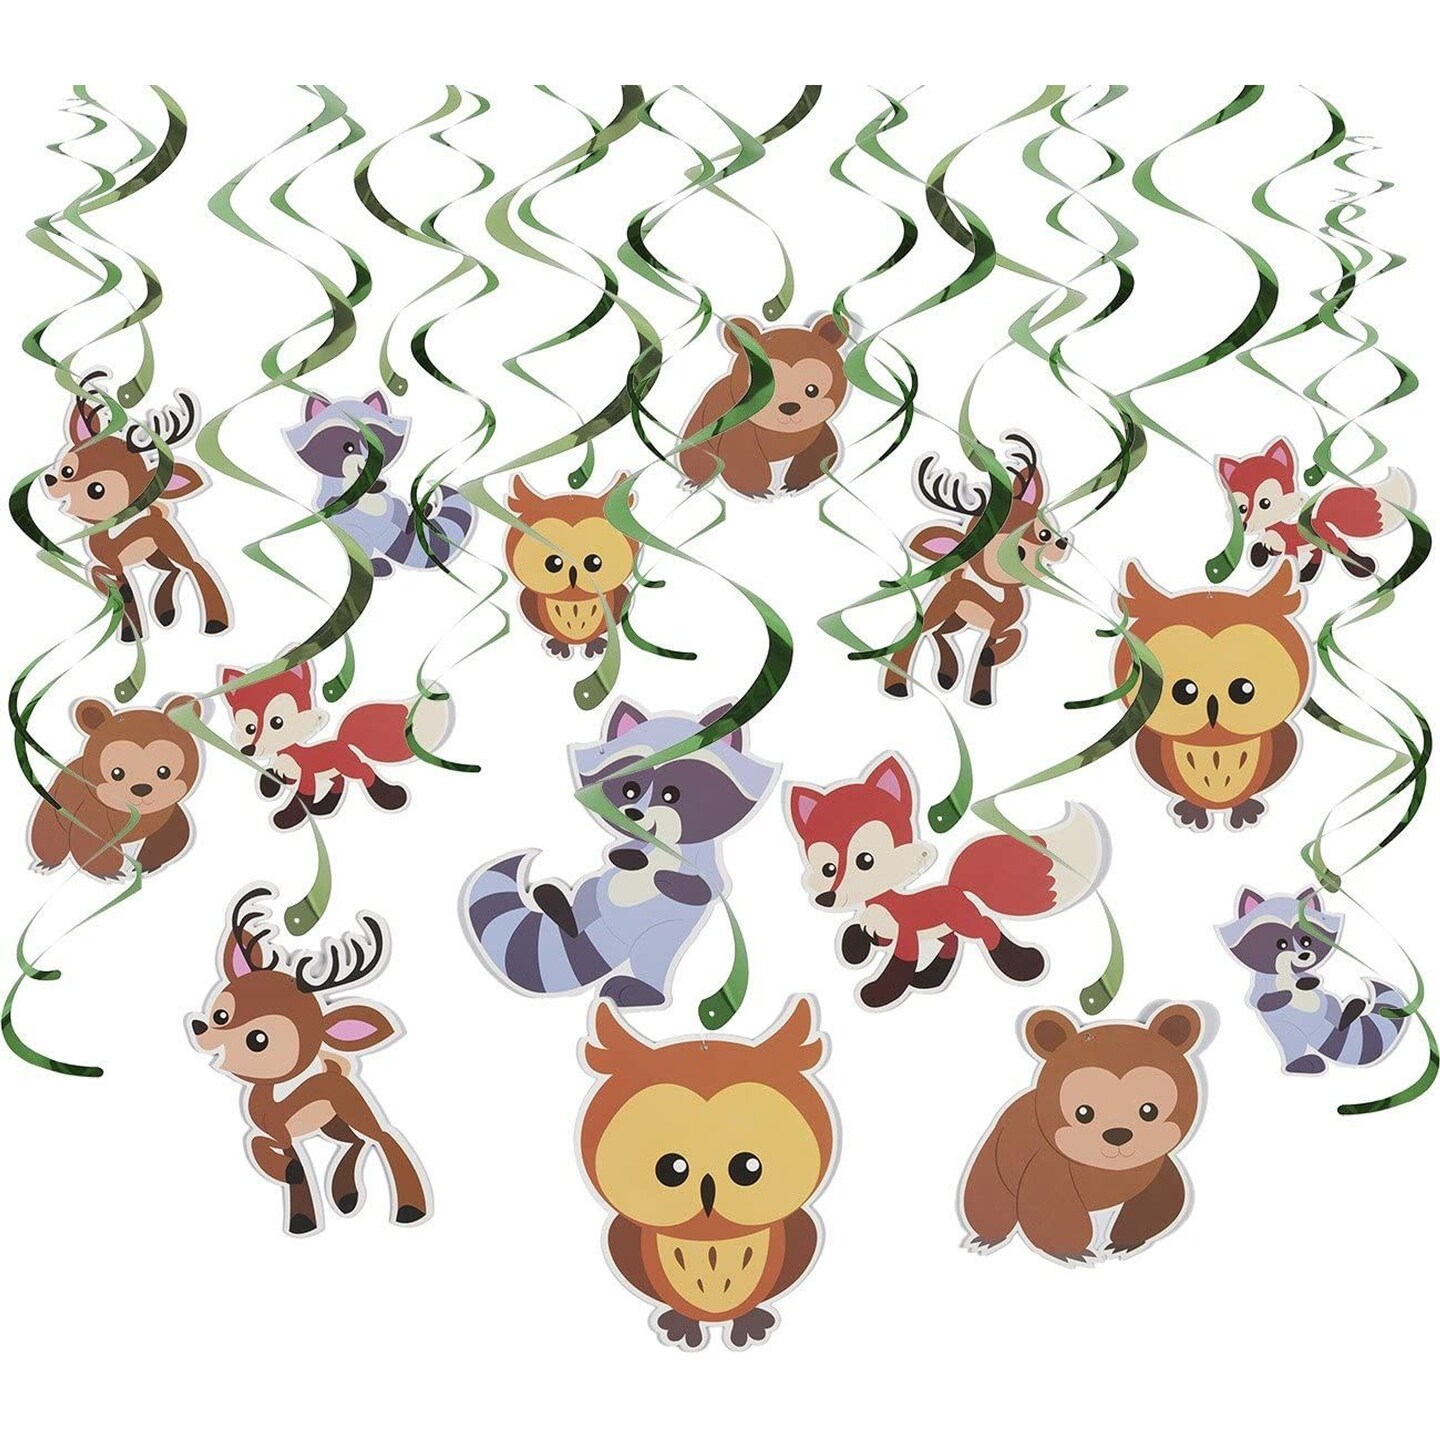 30-Count Swirl Decorations &#x2013; Woodland Animals DecorBirthday Party Decorations, Ceiling Streamers, Hanging Whirls for Kids, Multicolored - Hanging Length: 30 &#x2013; 37 Inches